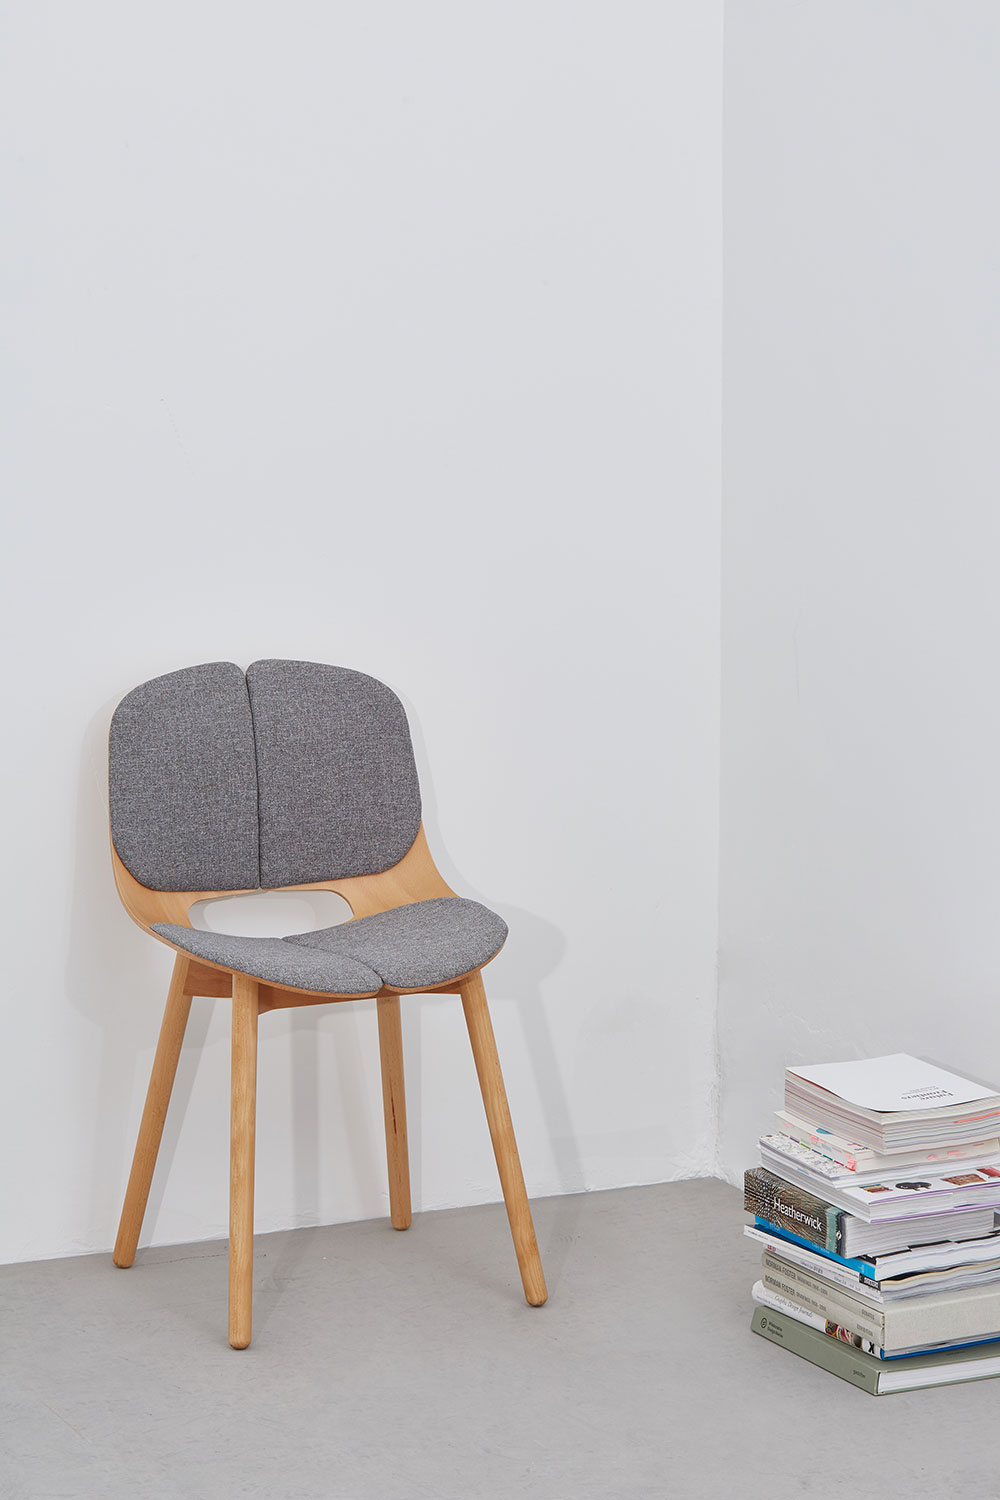 chair yonoh  product design studio valencia wood seating Interior Project